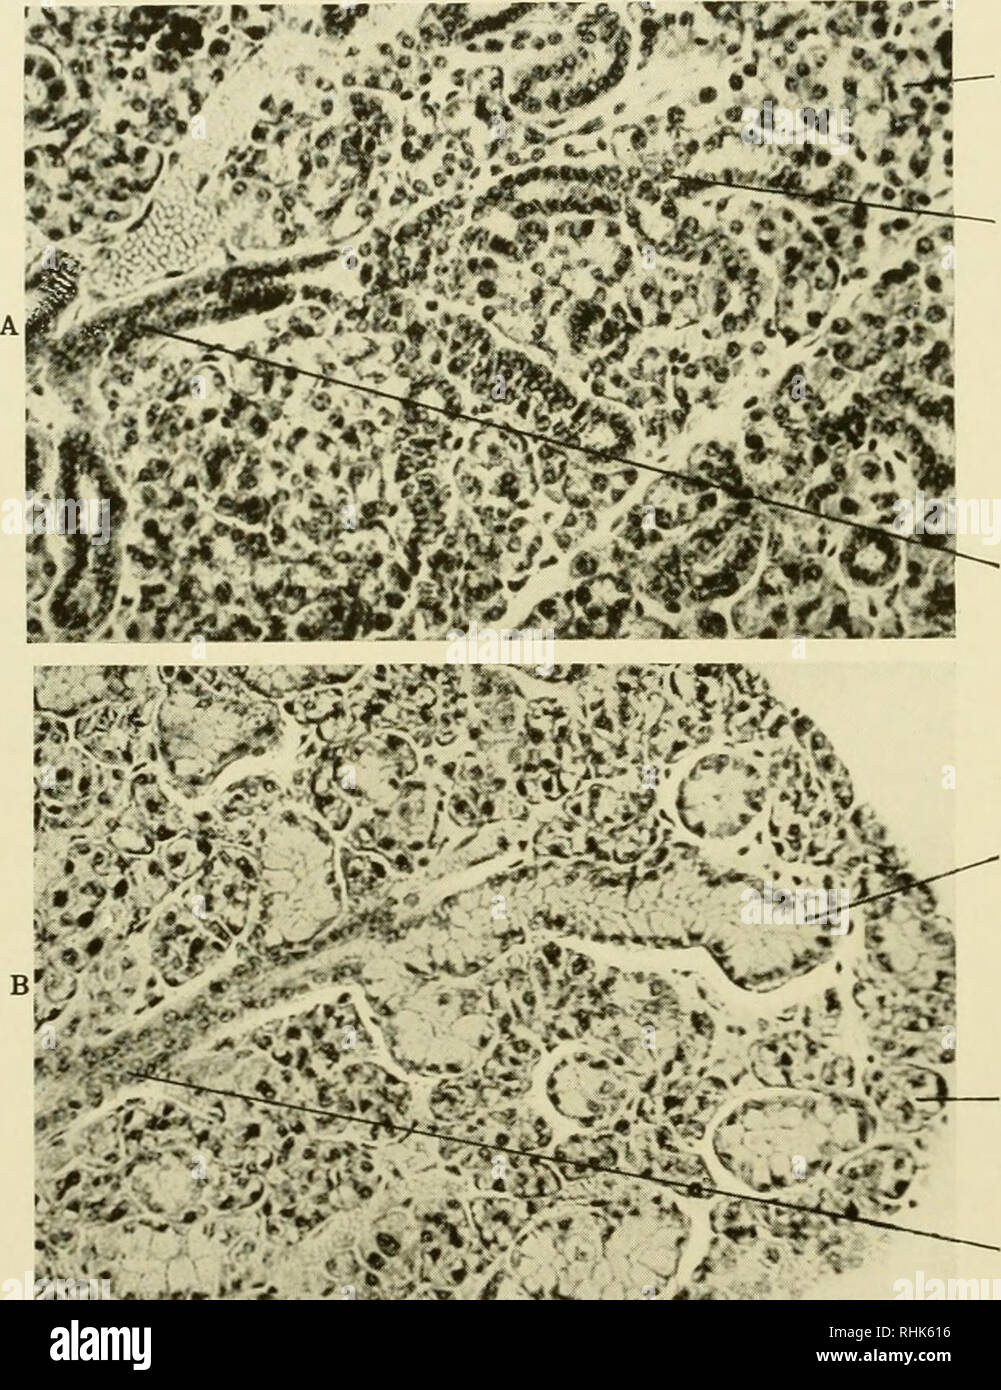 . Biology of the laboratory mouse. Mice as laboratory animals; Mice; Animals, Laboratory; Mice. 114 BIOLOGY OF THE LABORATORY MOUSE The central intralobular ducts of both sexes are Hned by rodded epithelium. In the adult female this type of epithelium also lines the terminal tubules into which the central intralobular ducts divide (Fig. 50A). In the adult male the lining of the terminal tubules and some of the alveoli opening into them consists of tall columnar epithelial cells with the nuclei near and often flattened against the bases (Fig. 50B). These cells resemble mucous cells. Terminal tu Stock Photo